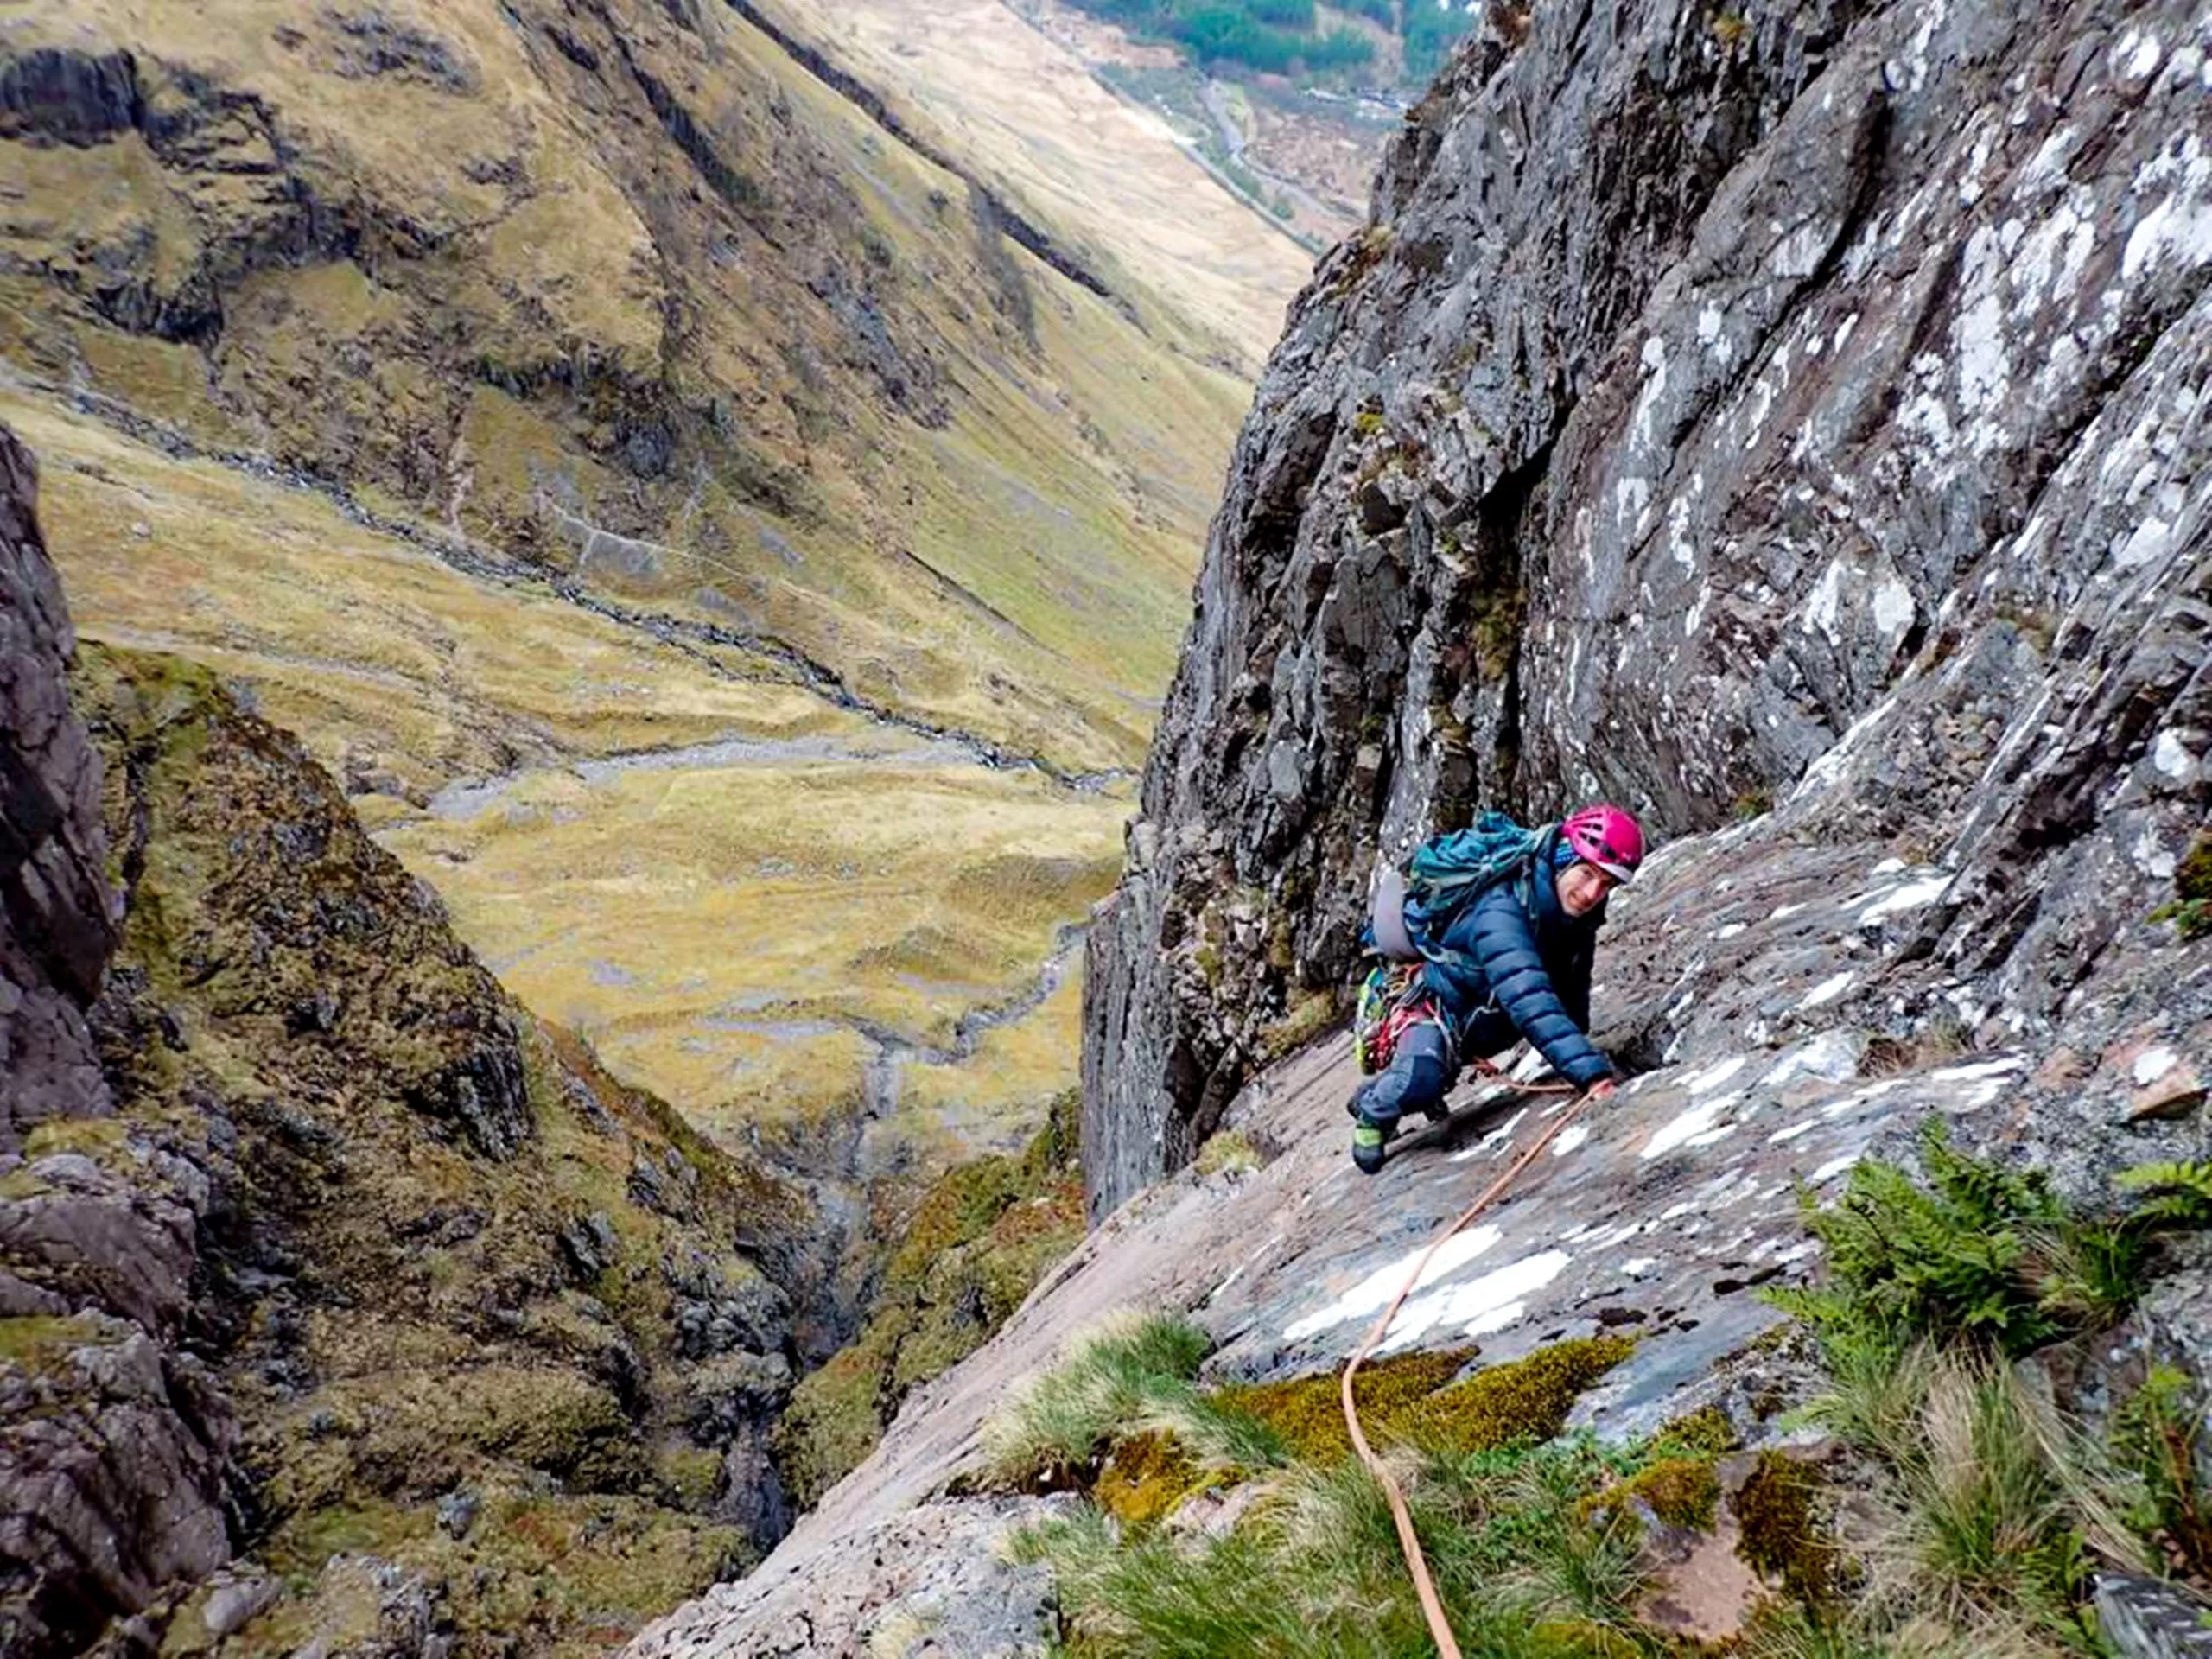 Climber James Mchaffie on a route